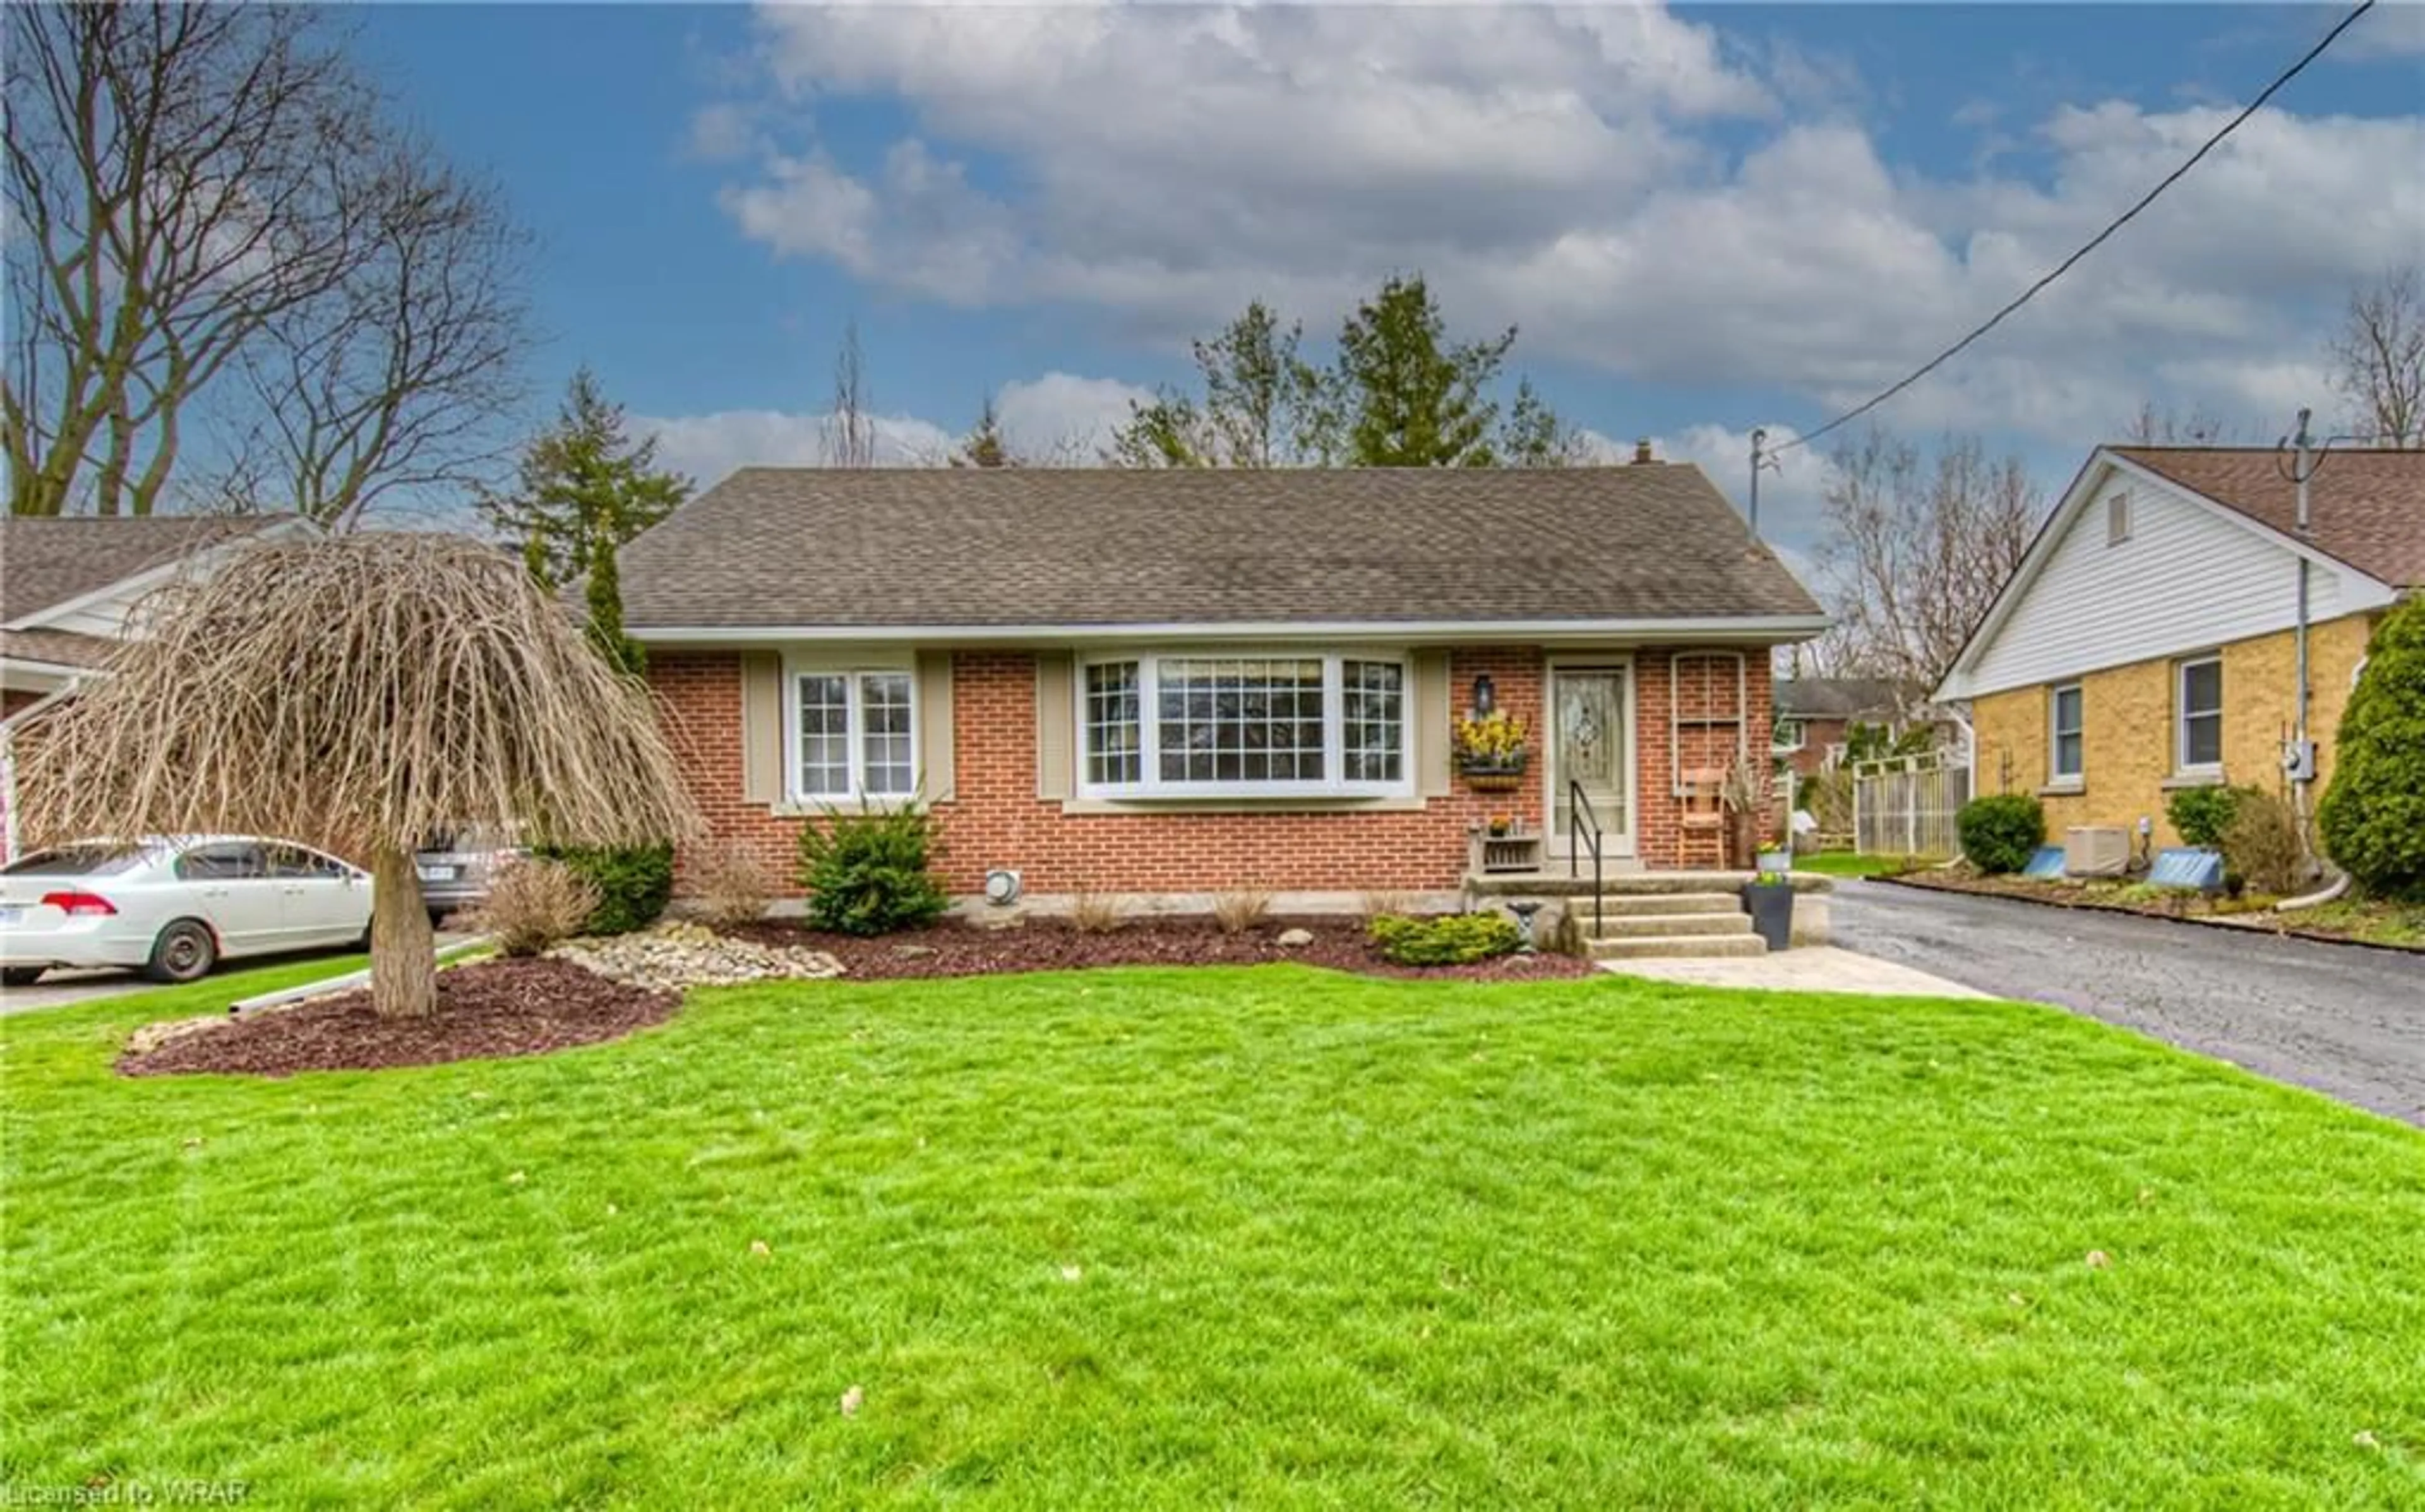 Frontside or backside of a home for 193 Douglas St, Waterloo Ontario N2L 1K6